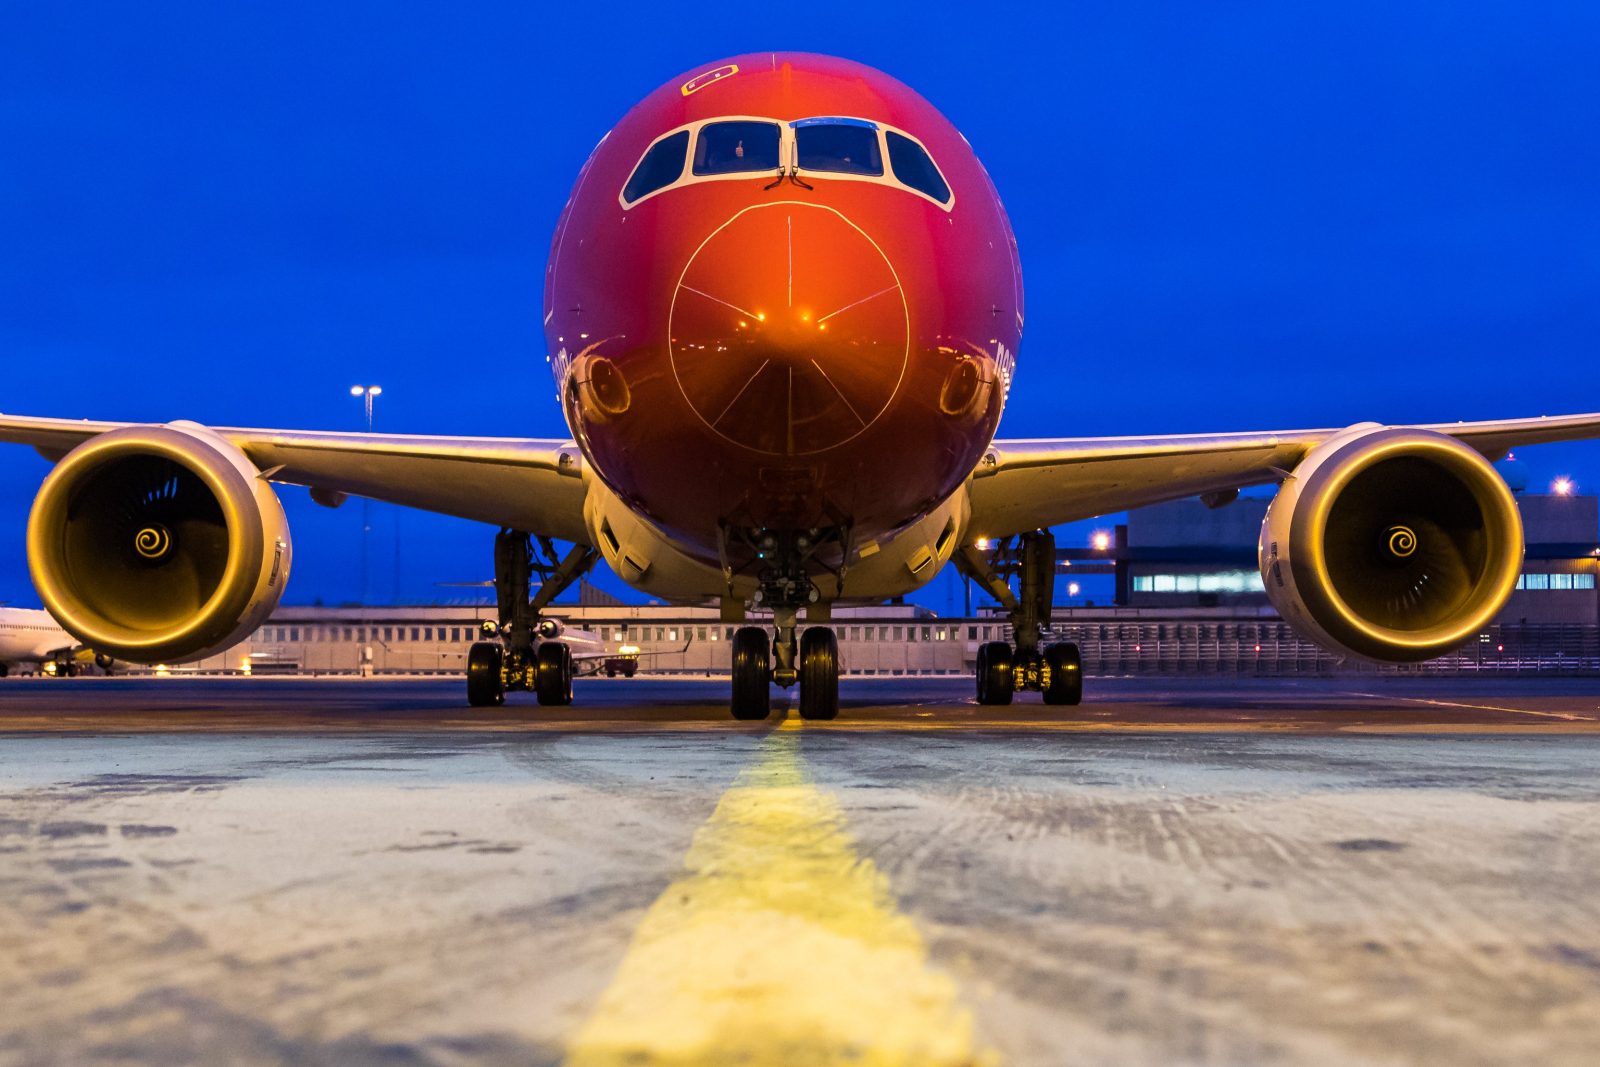 Norwegian Carried Over 33 Million Passengers Last Year, Recruited Over 2,000 New Staff